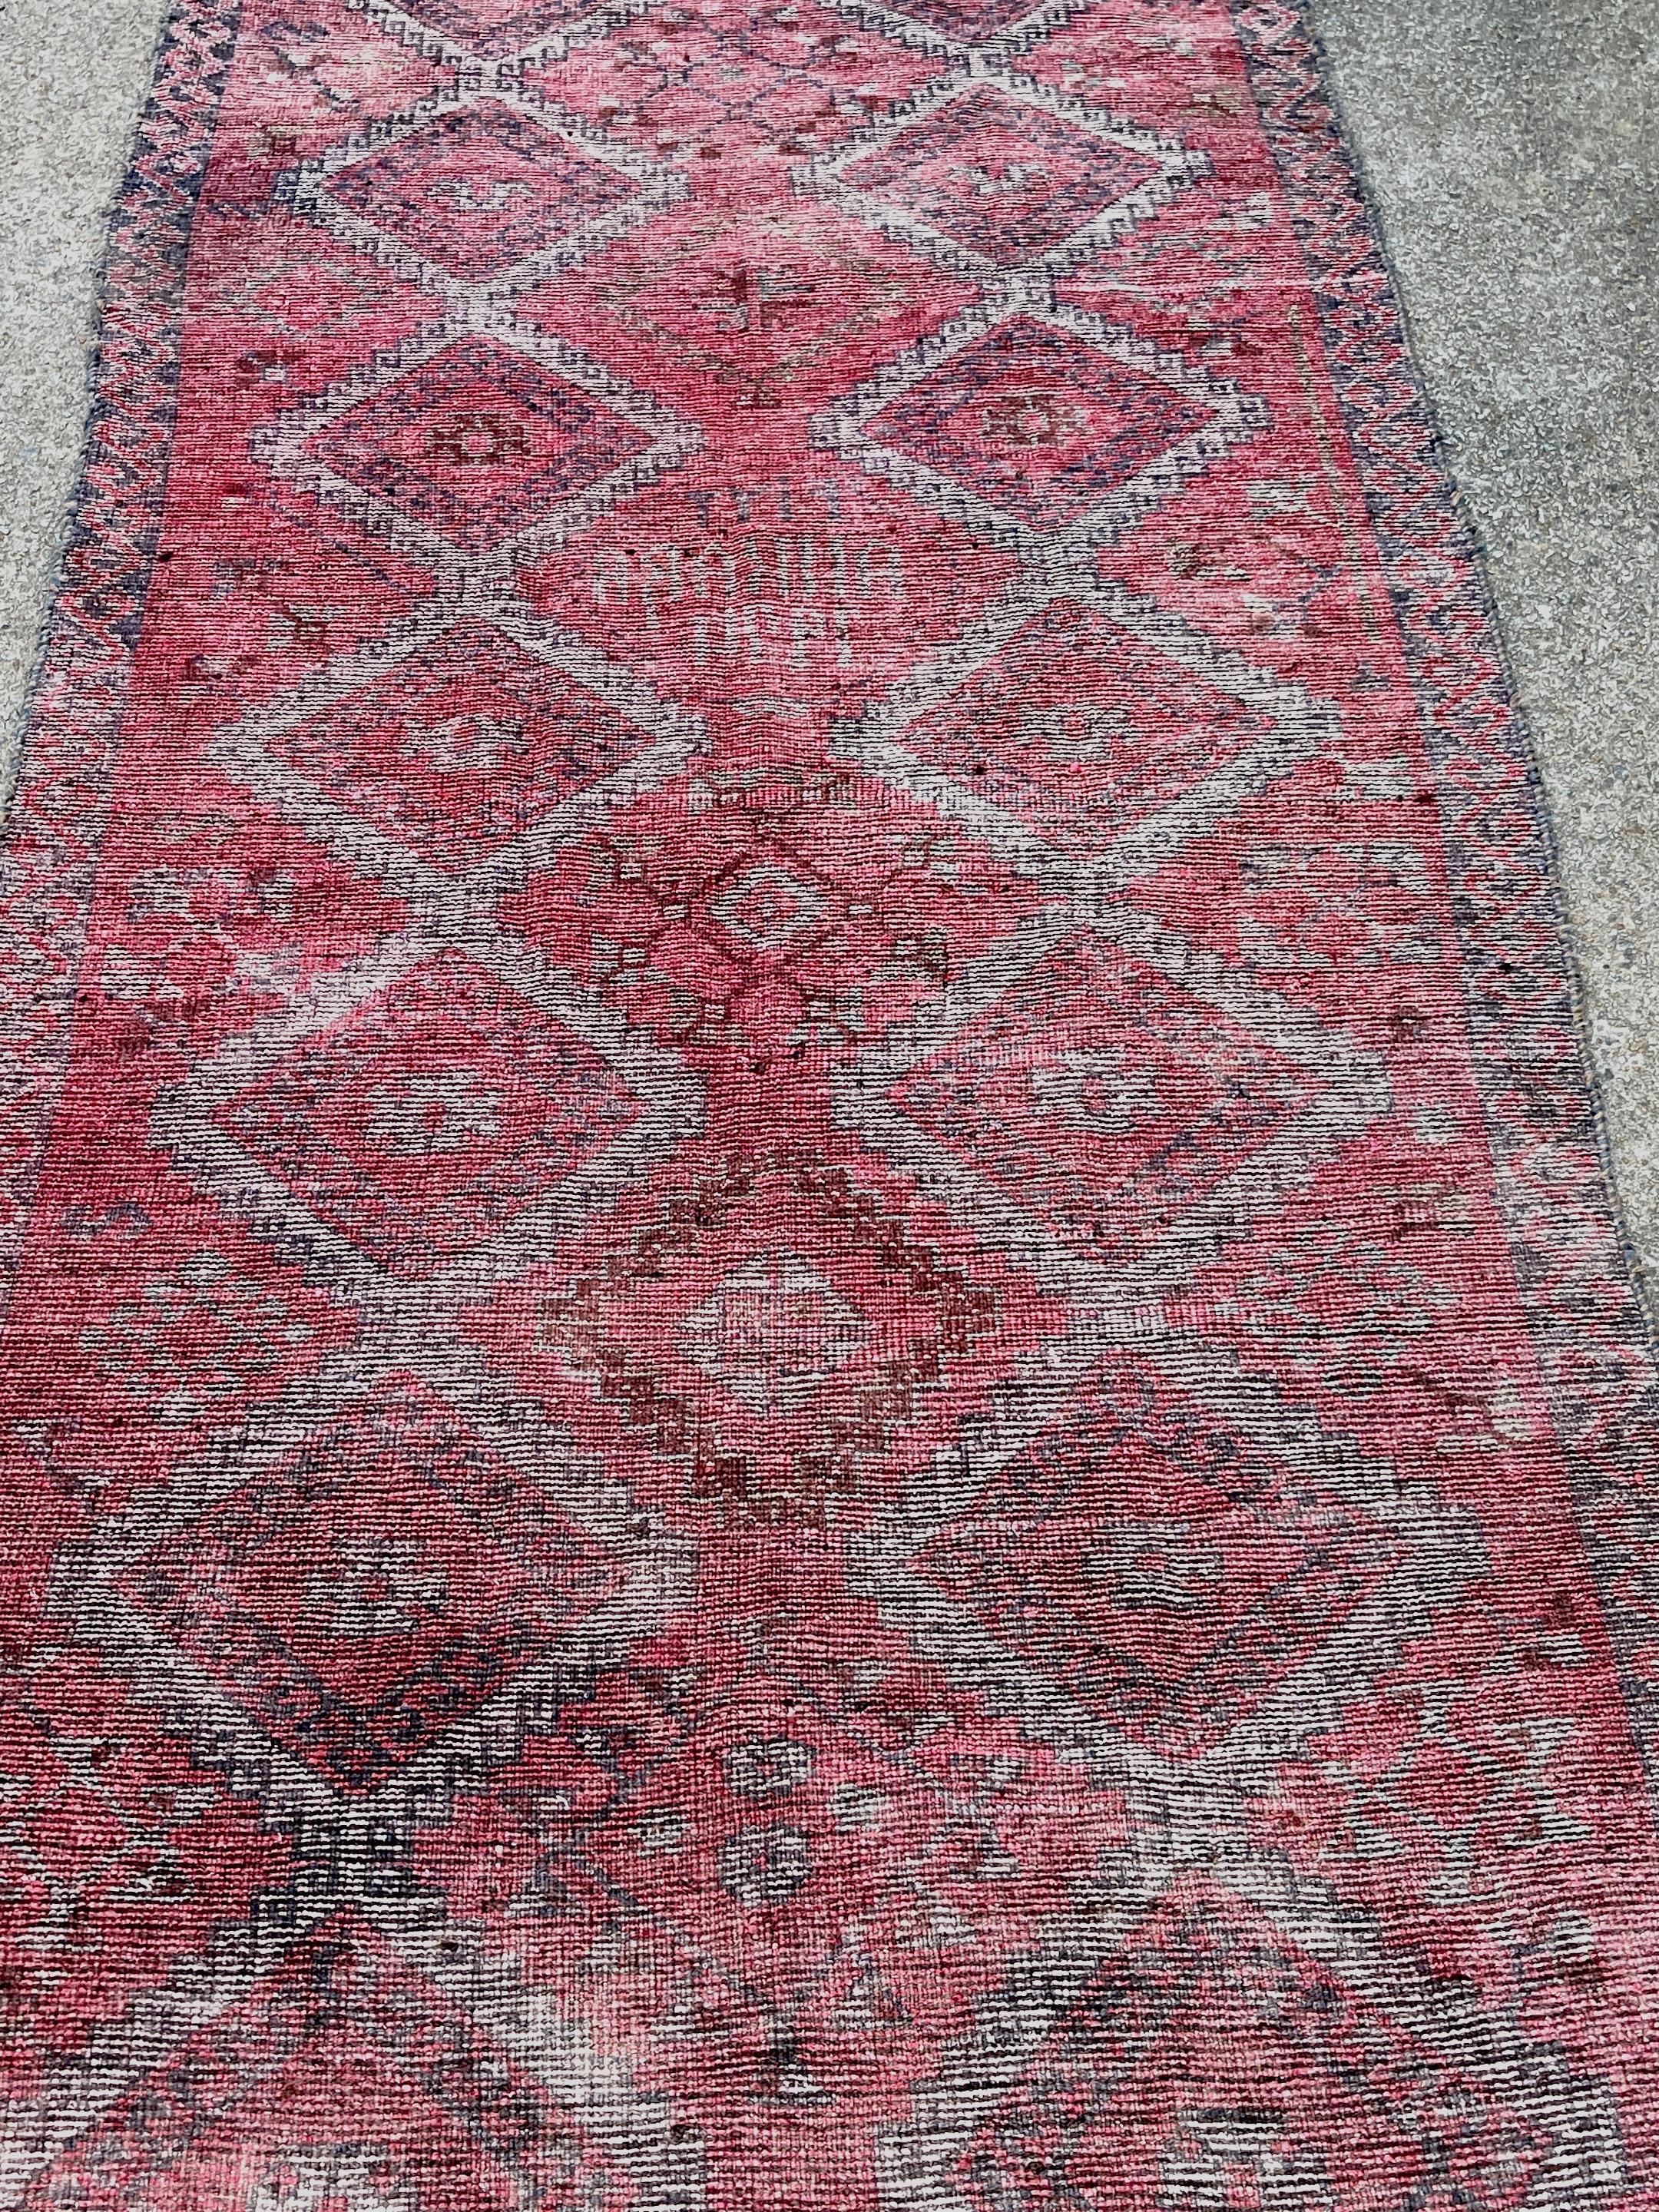 Distressed Hand-Knotted Wool Caucasian Rug 'Reservable' Signed & Dated 1994 For Sale 6